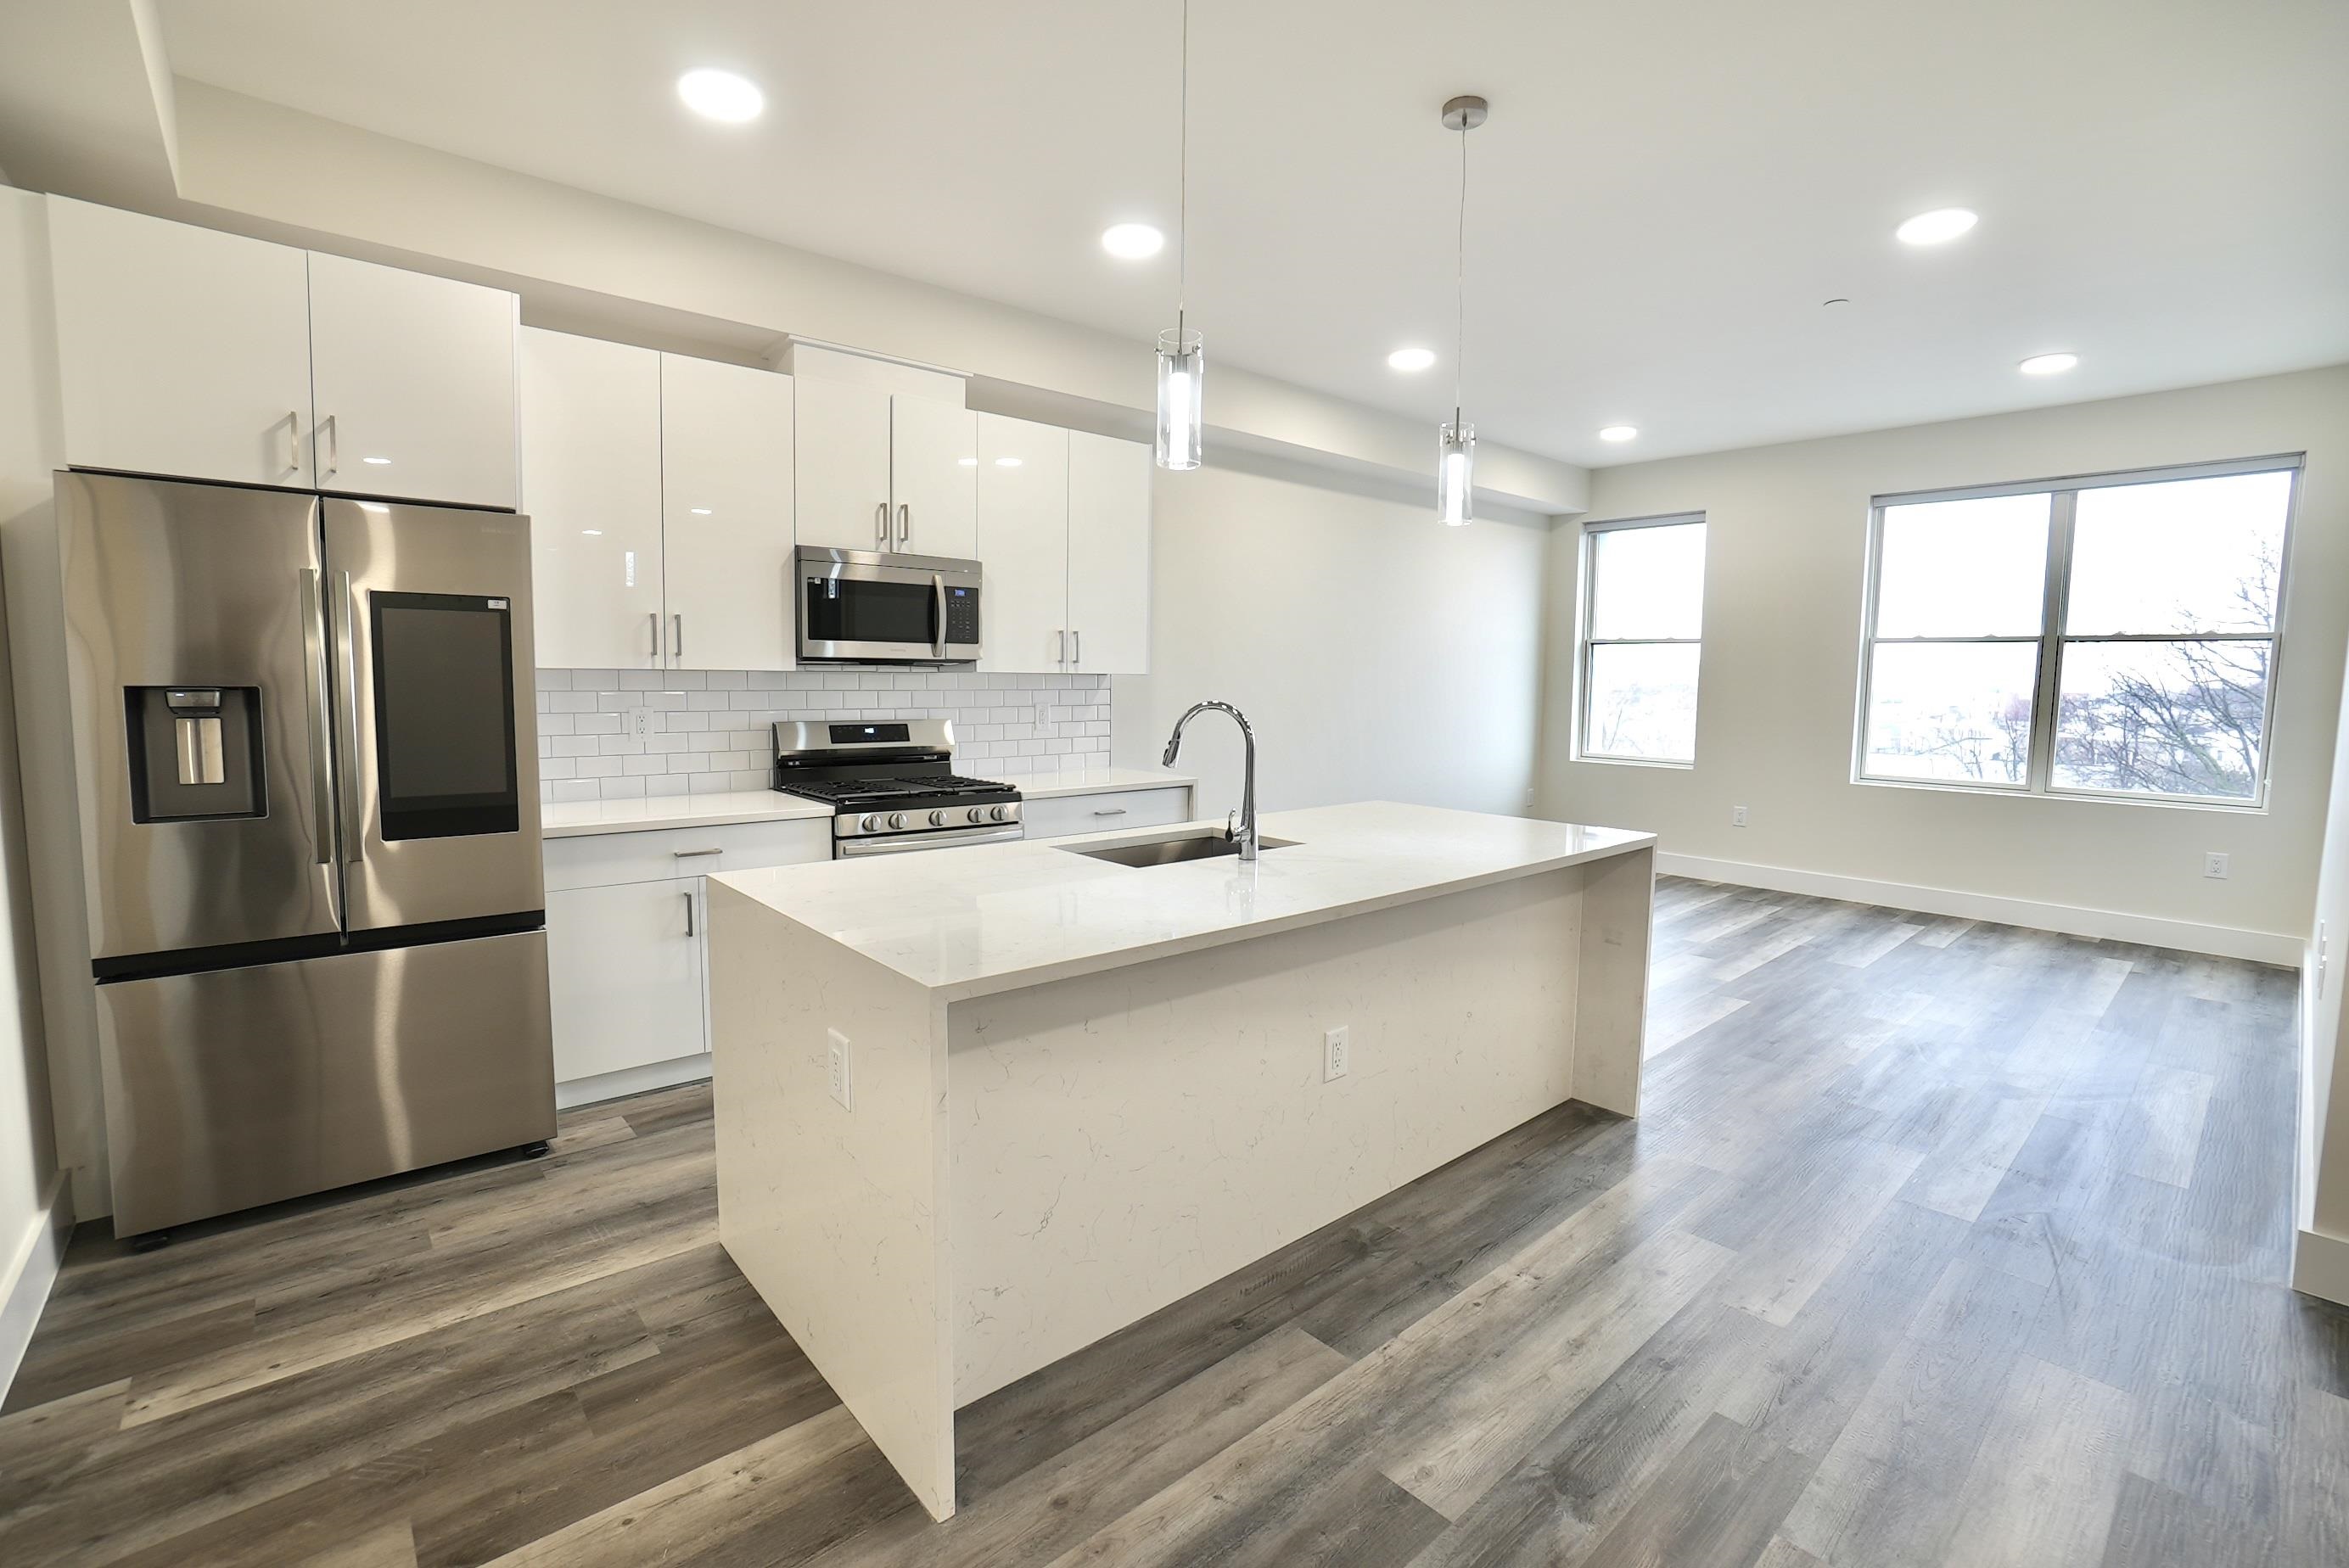 # 240002478 - For Rent in JERSEY CITY - Heights NJ